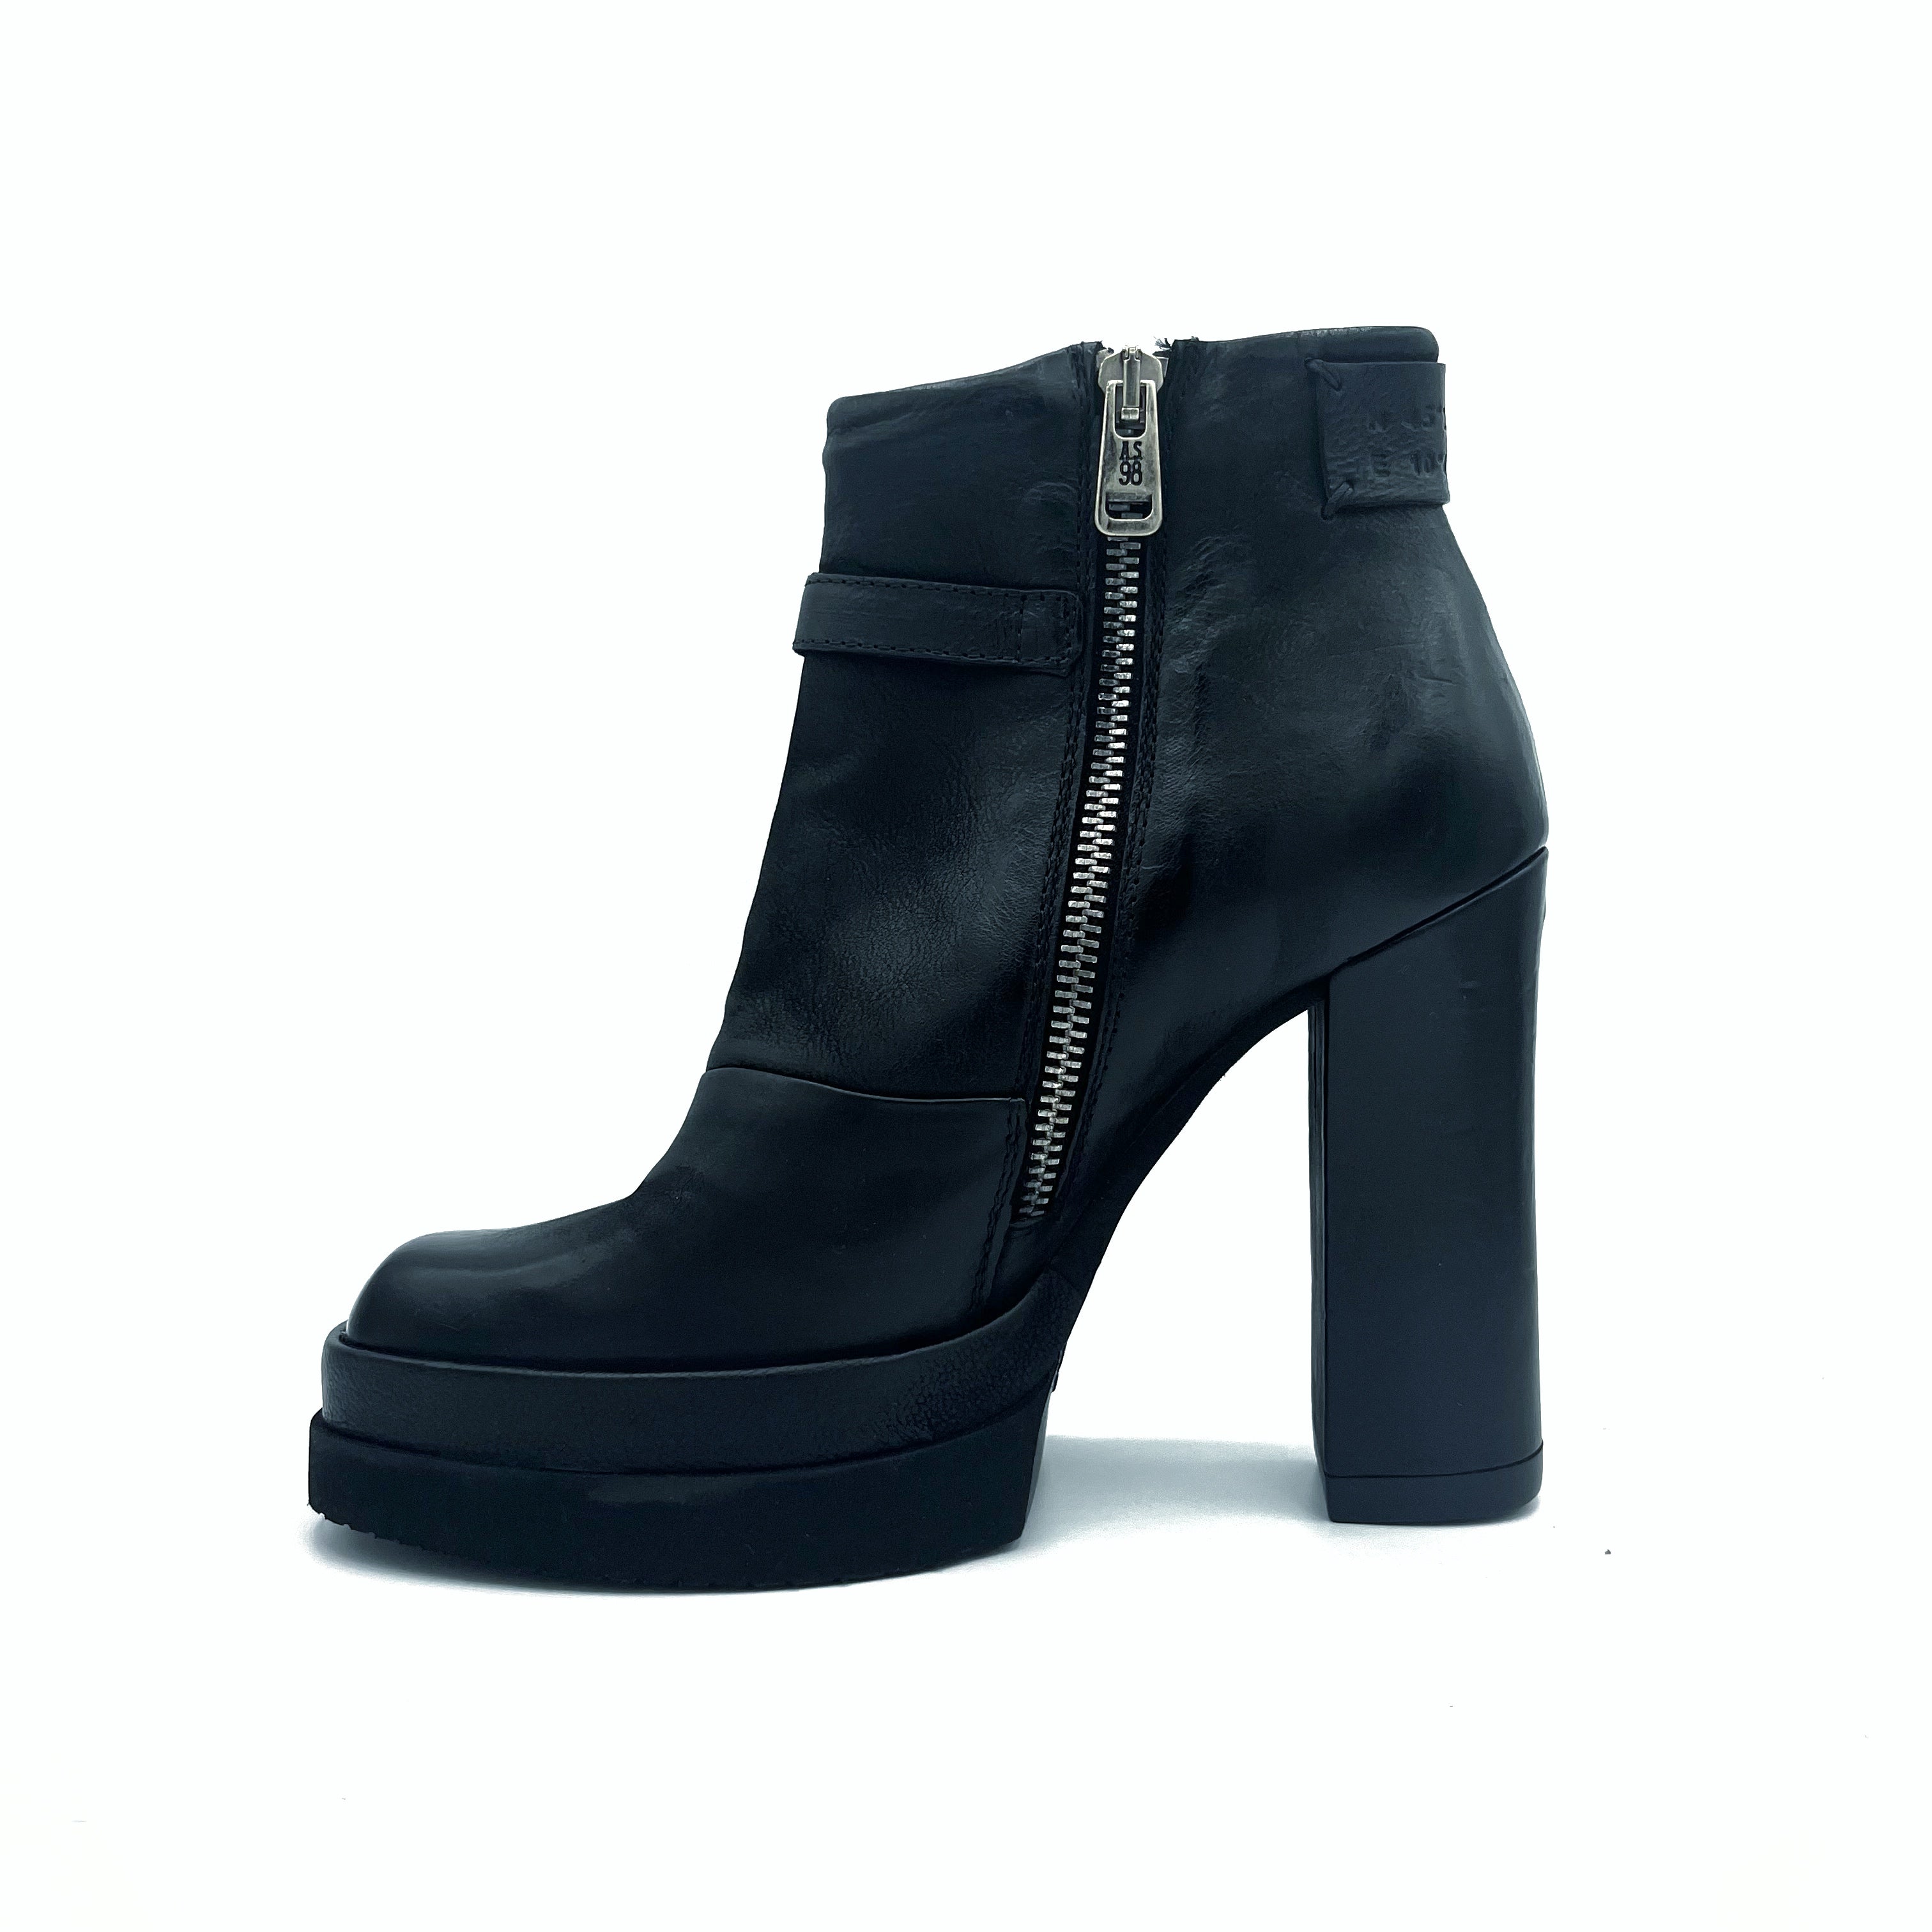 Inner side view of the A.S.98 Vinal High-heeled Bootie in Black